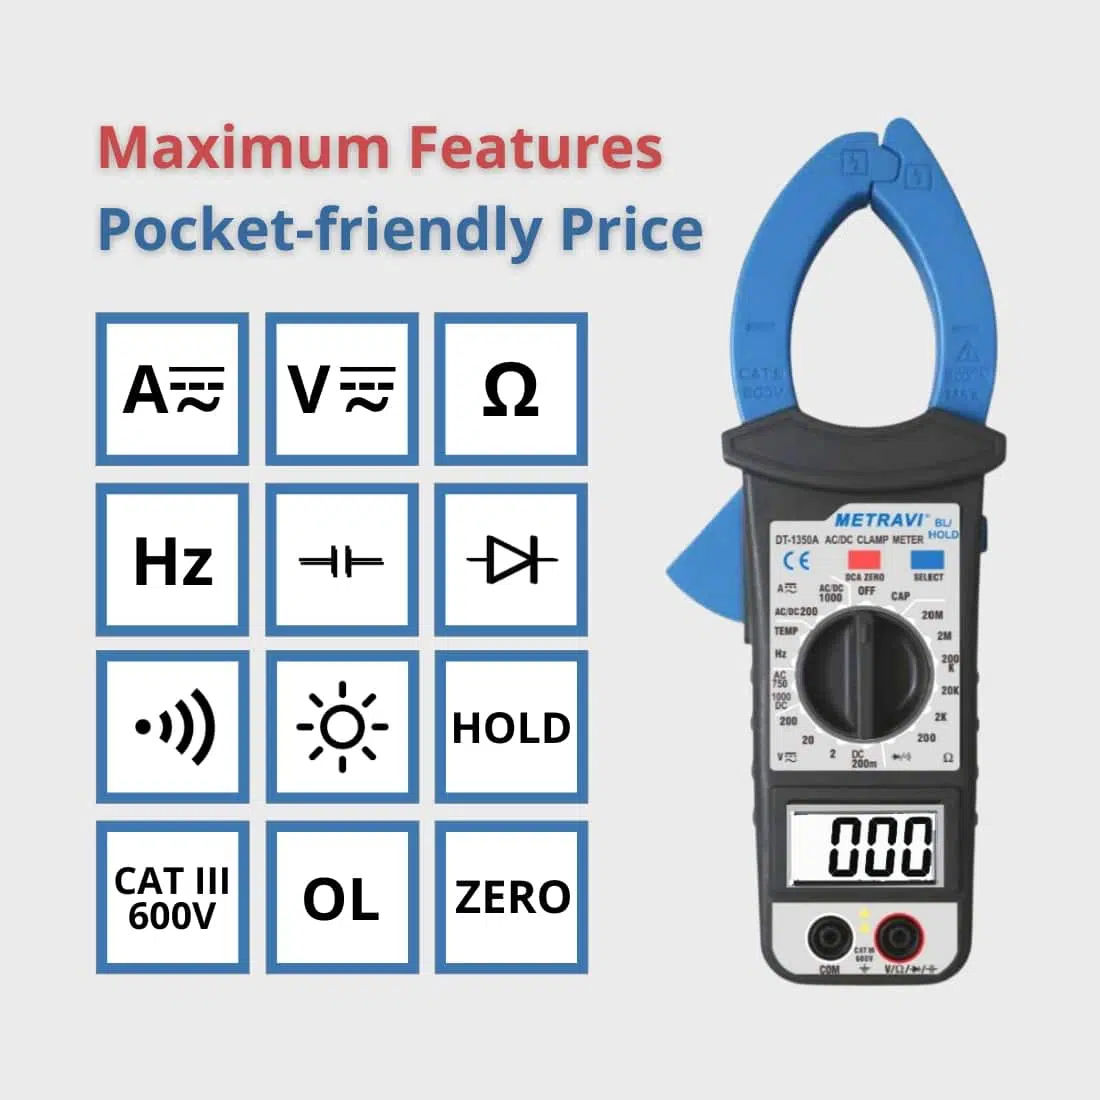 Metravi DT-1350 Digital AC/DC Clamp Meter upto 1000A with full function overload protection circuit